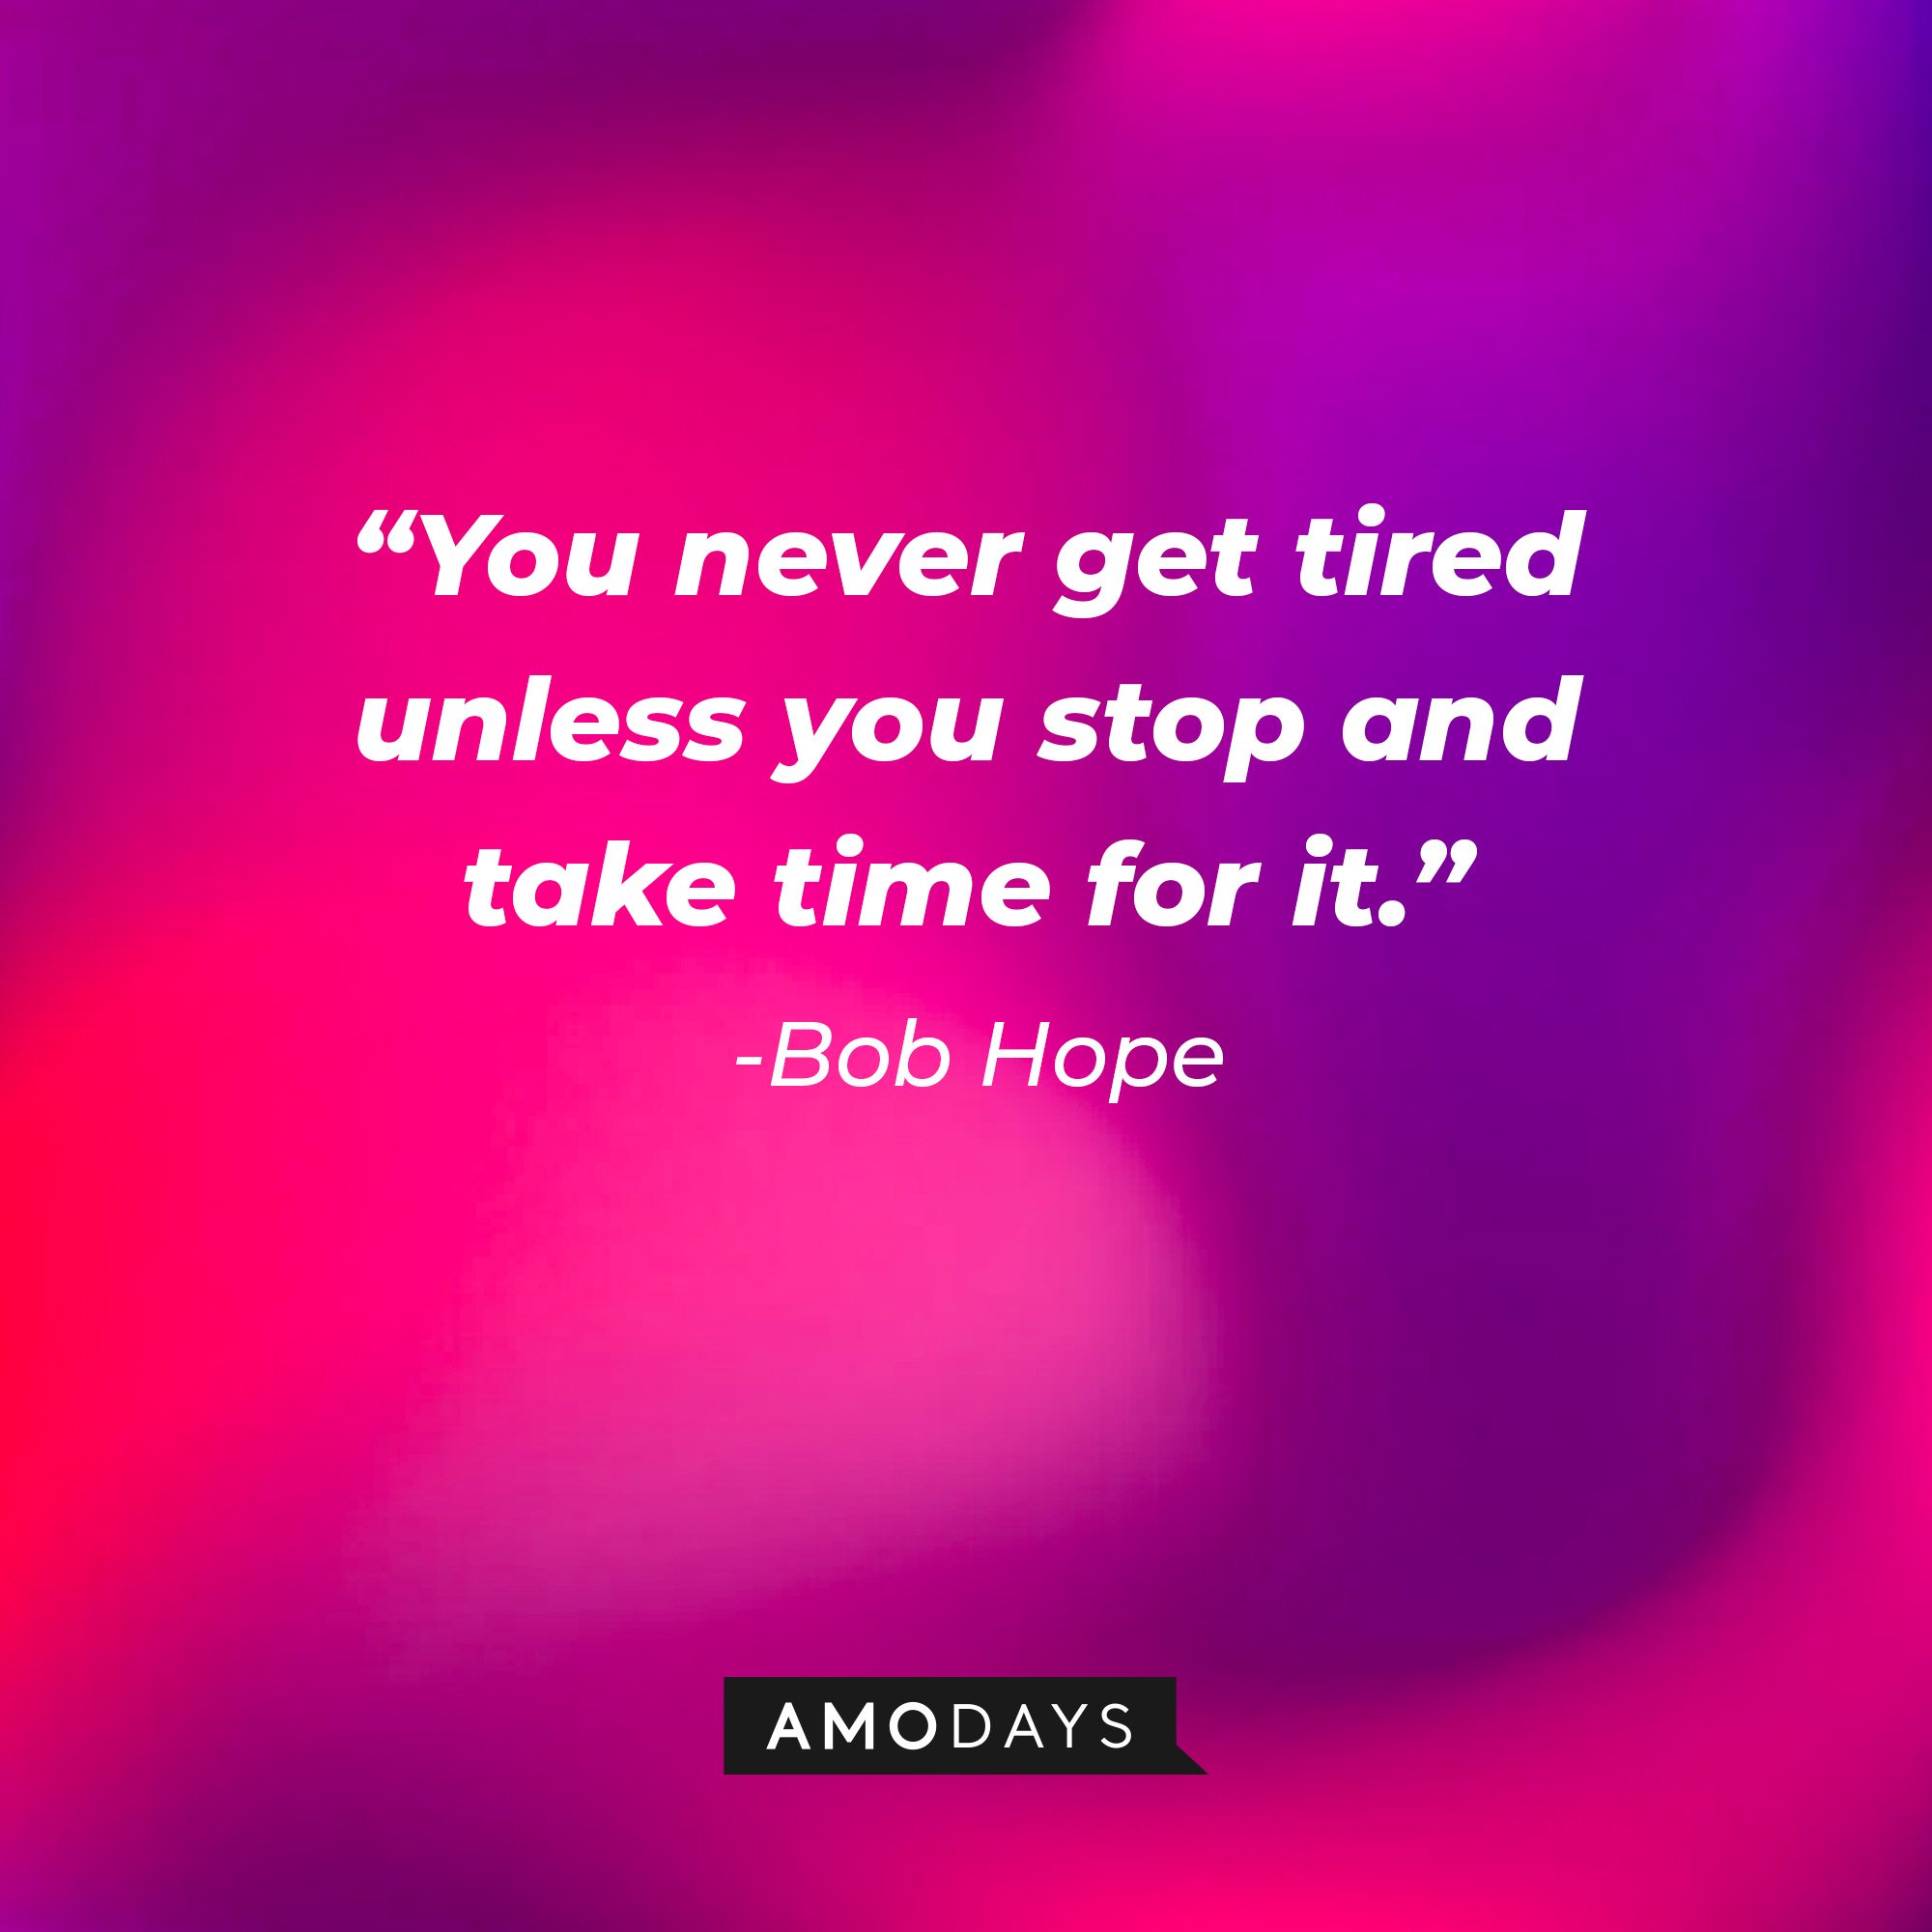 Bob Hope's quote: “You never get tired unless you stop and take time for it.” }| Image: AmoDays